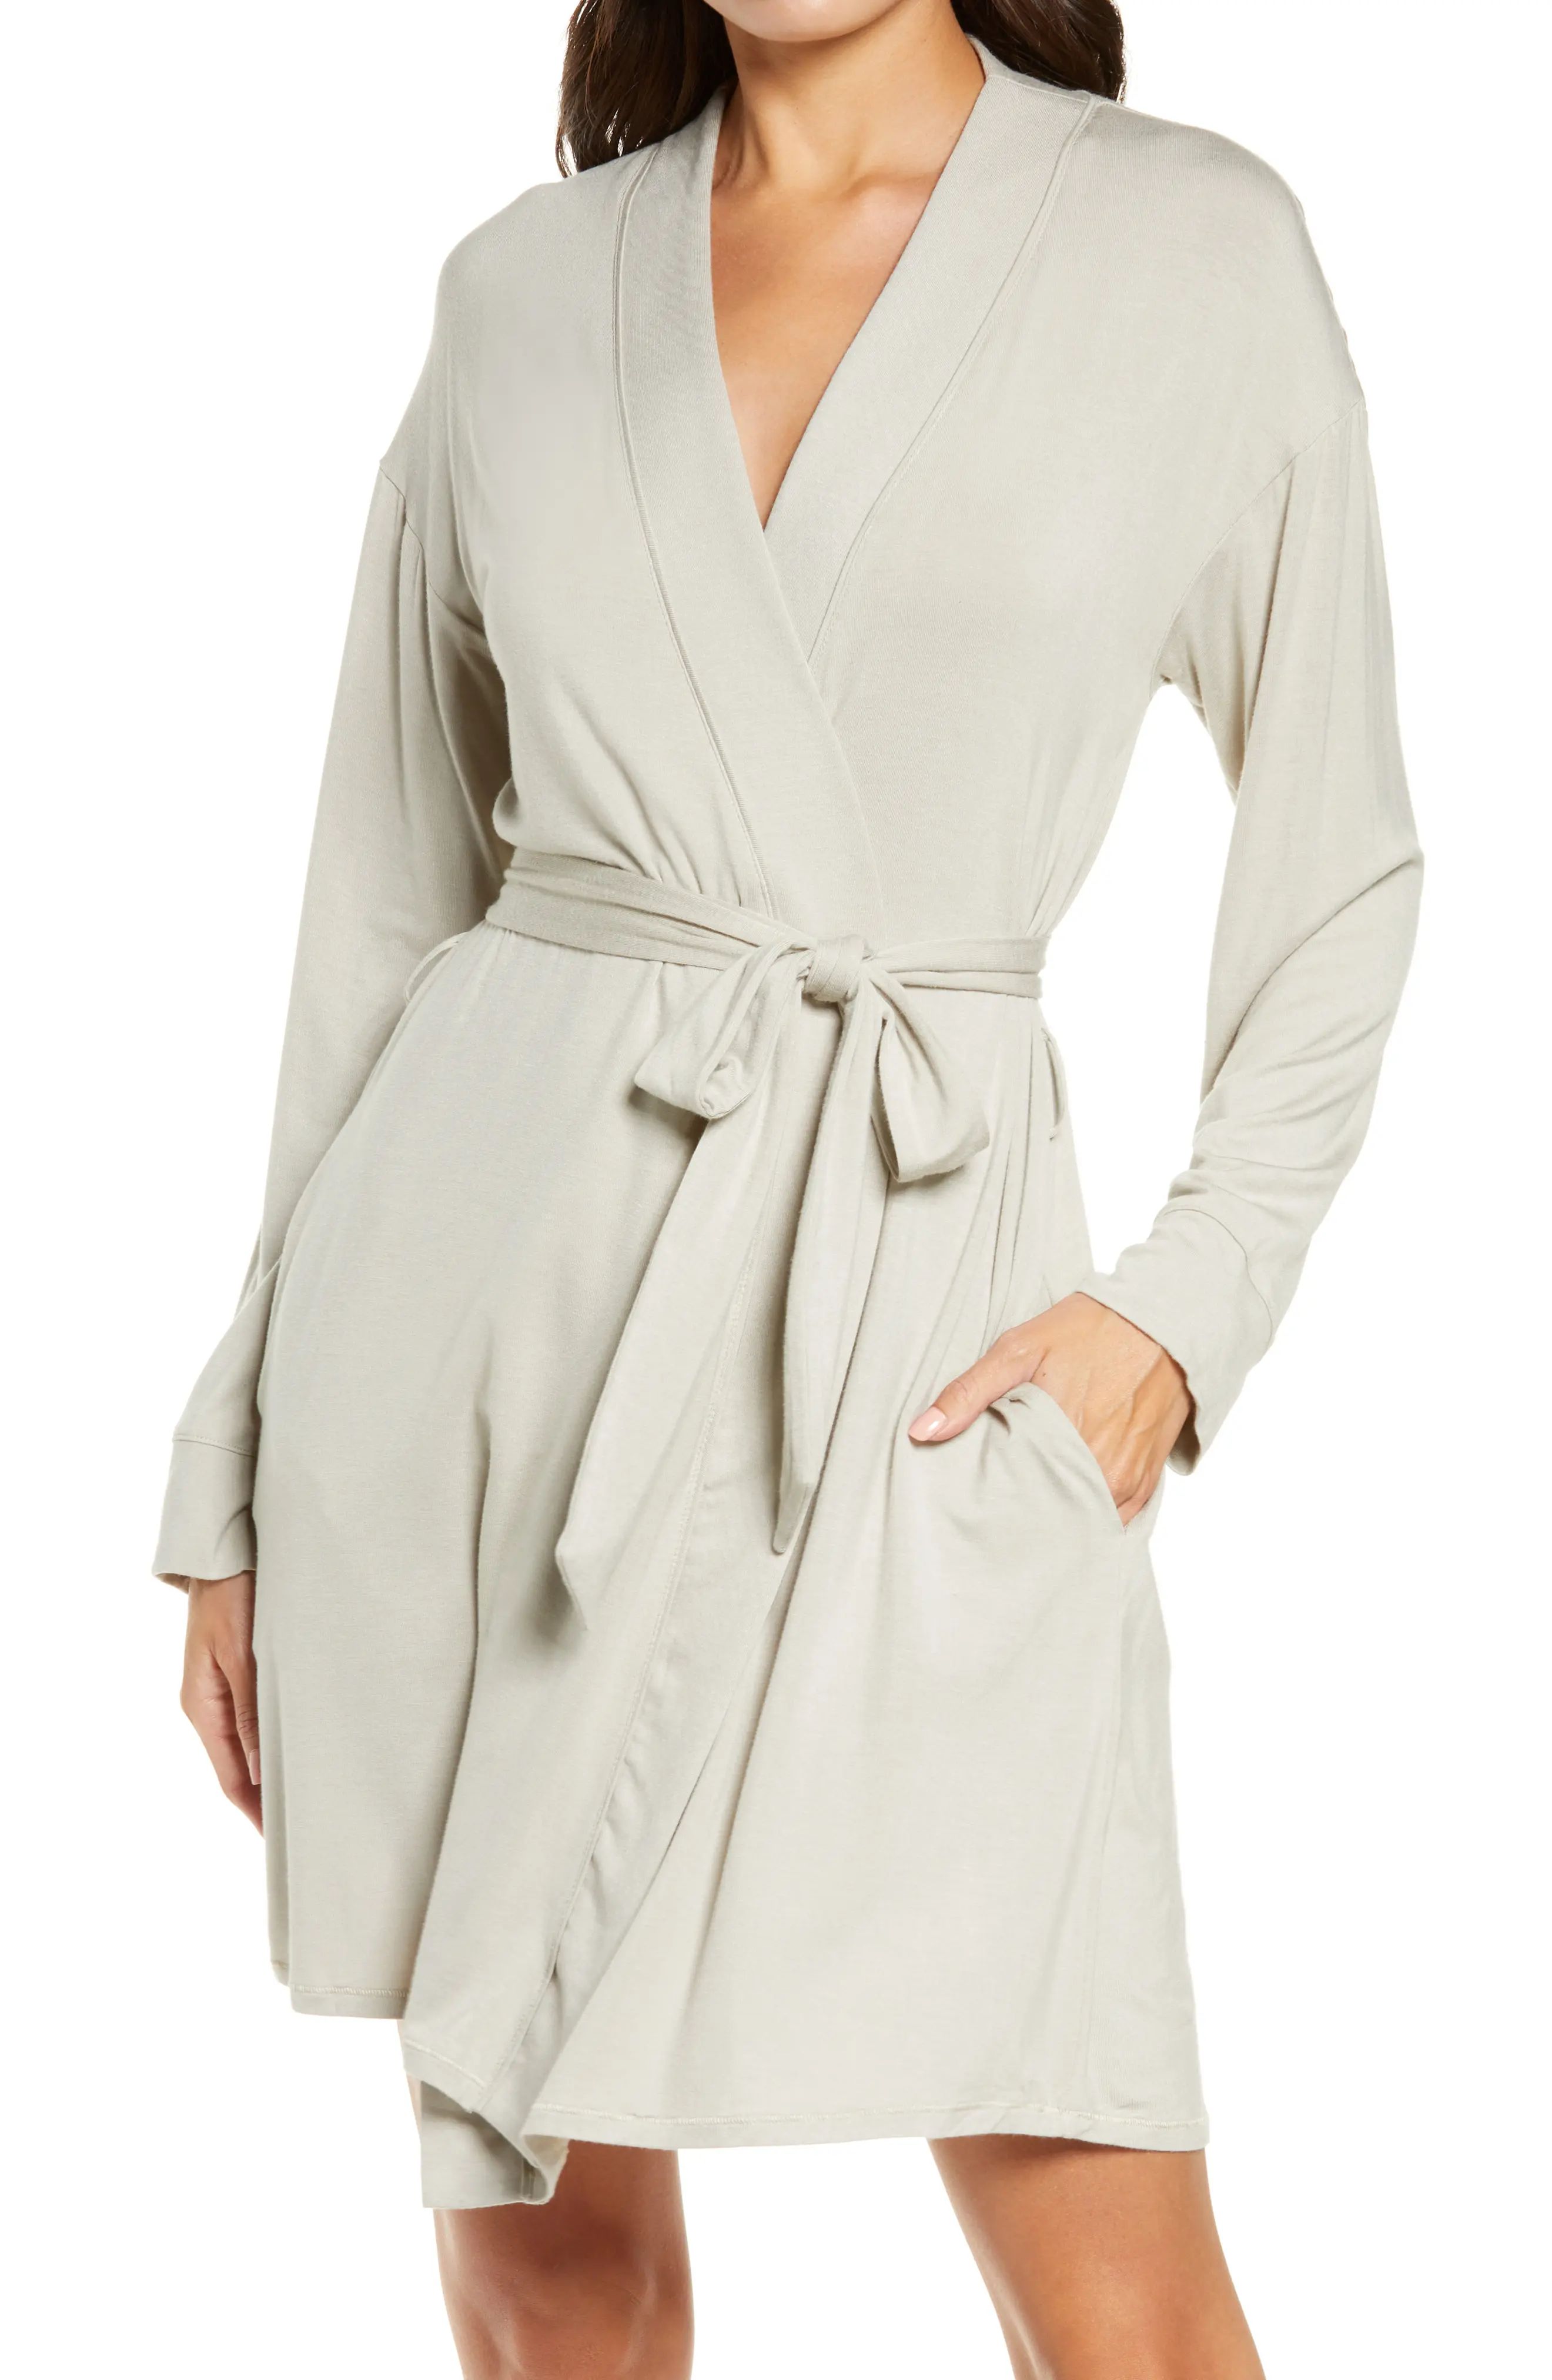 SKIMS Sleep Knit Robe, Size Xx-Small in Talc at Nordstrom | Nordstrom